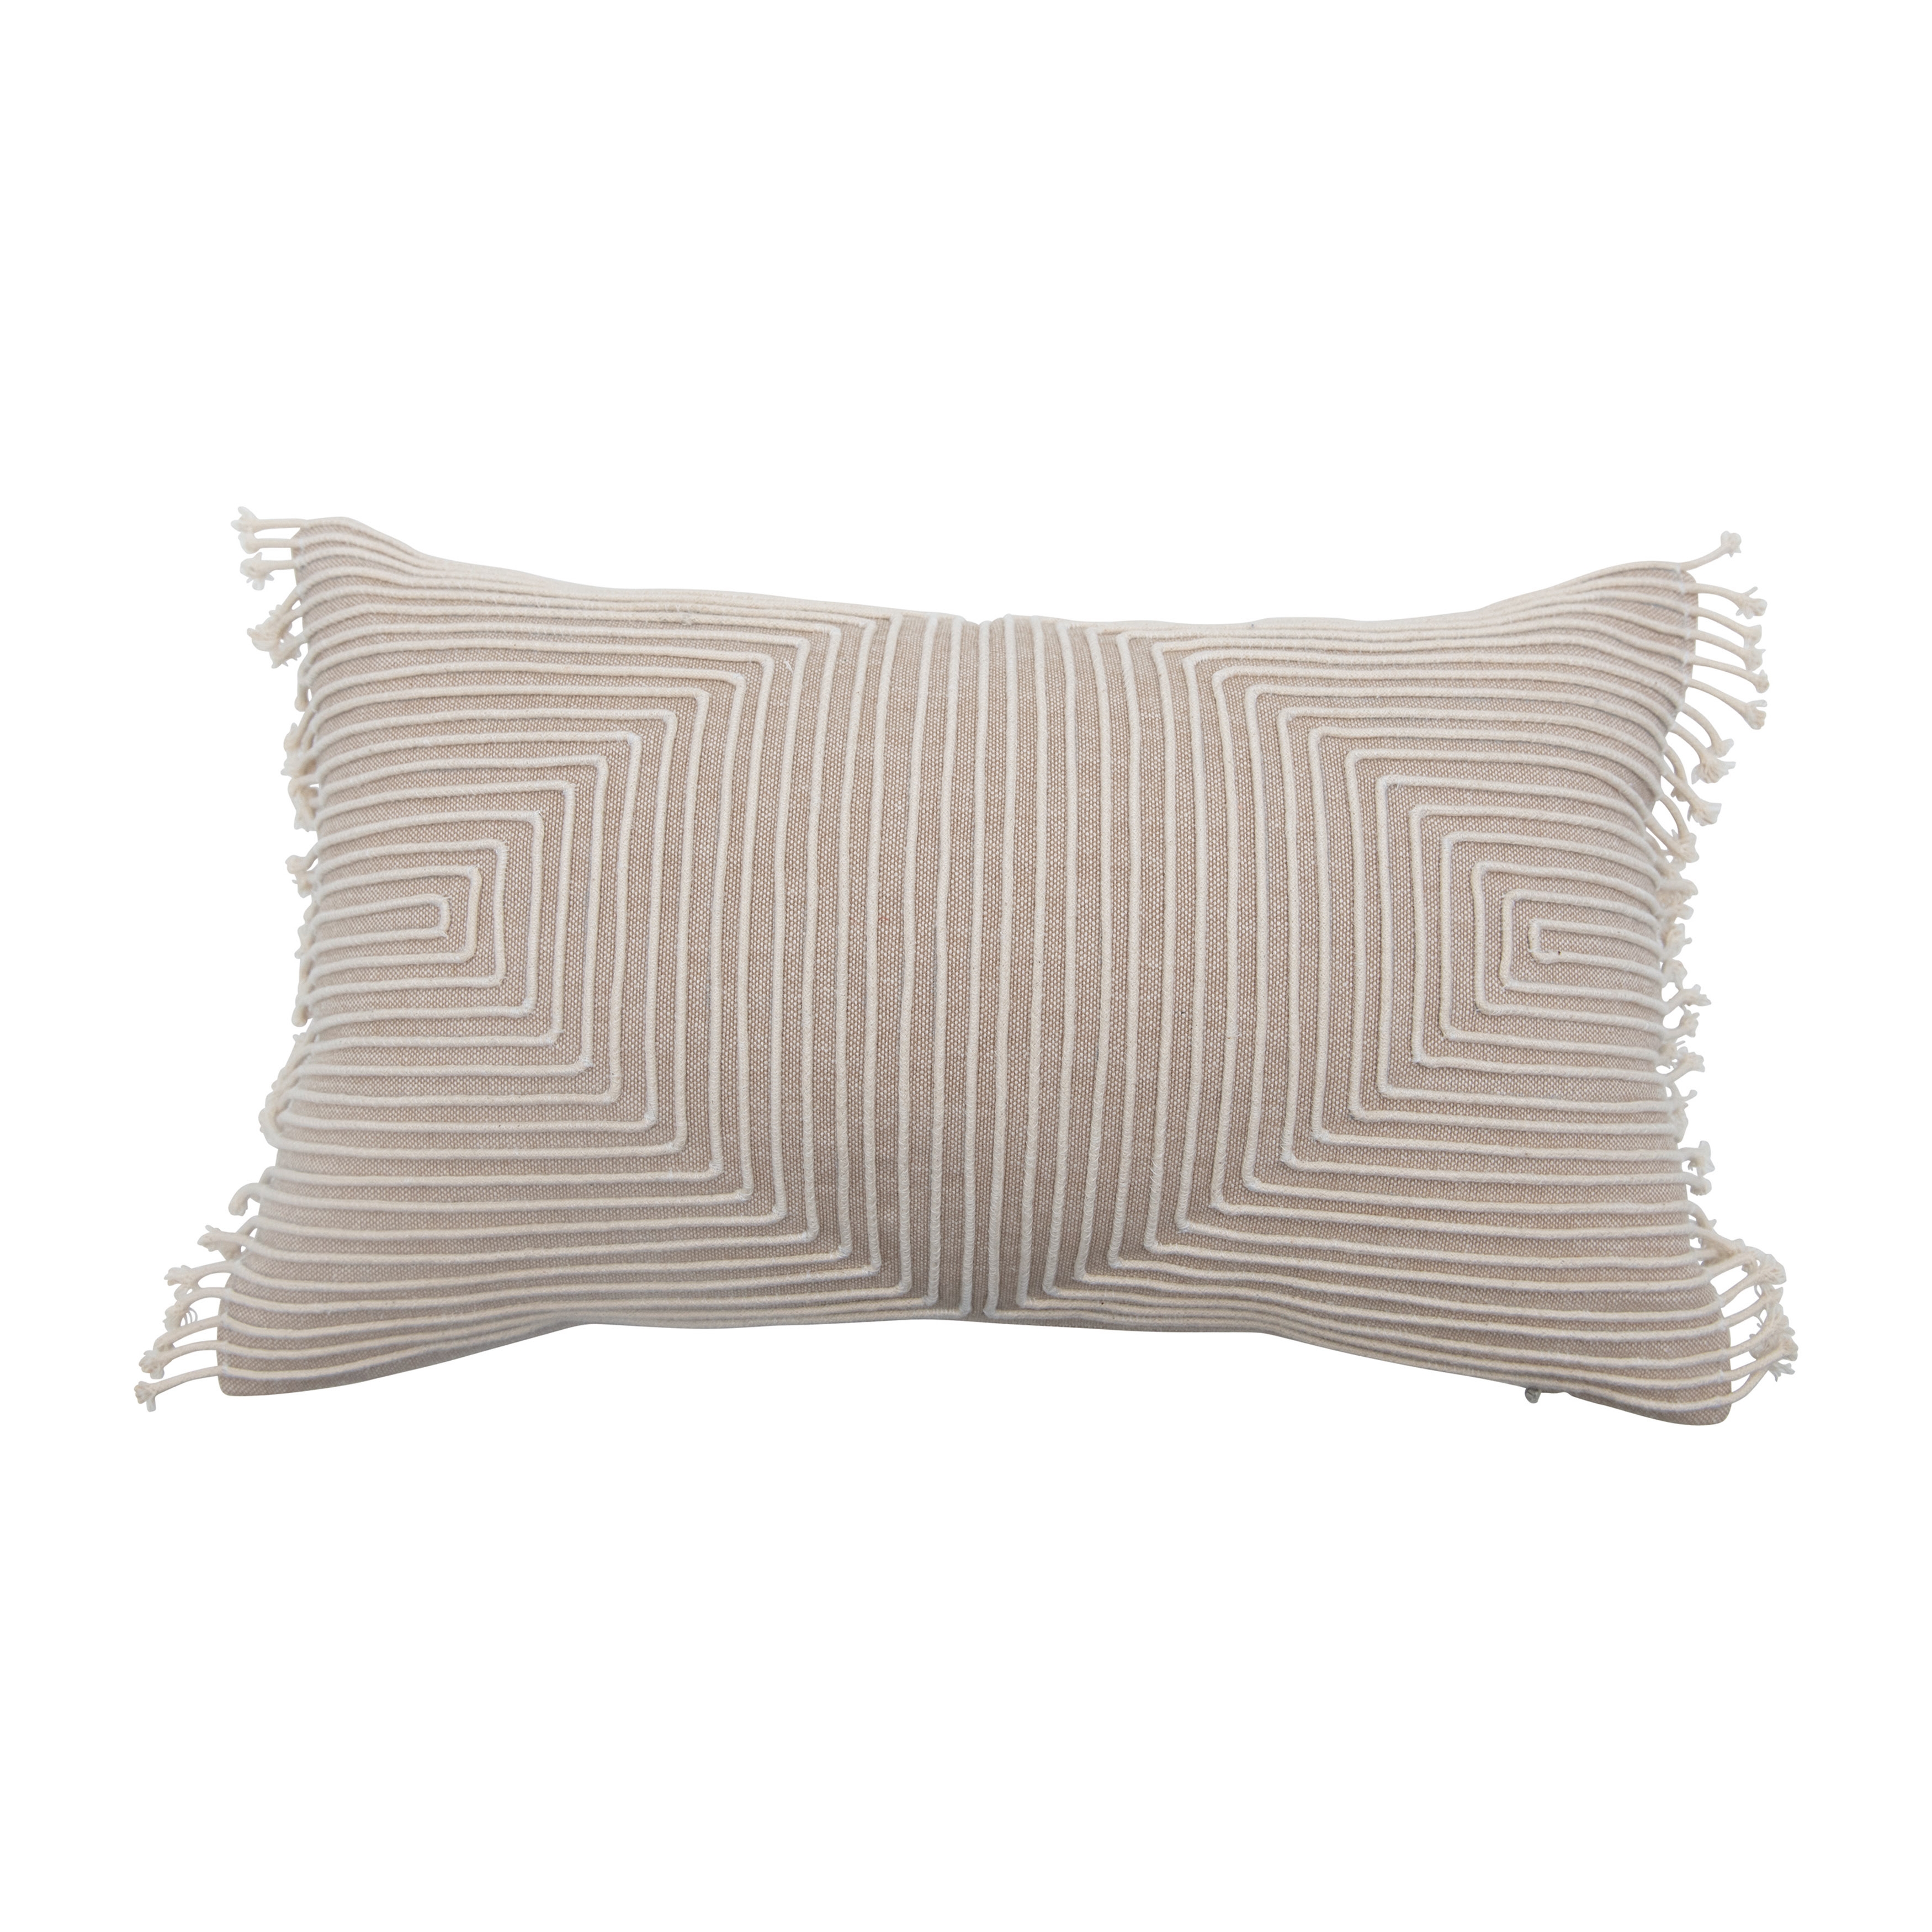 Cotton Chambray Appliqued Lumbar Pillow with Piping & Fringe - Image 1